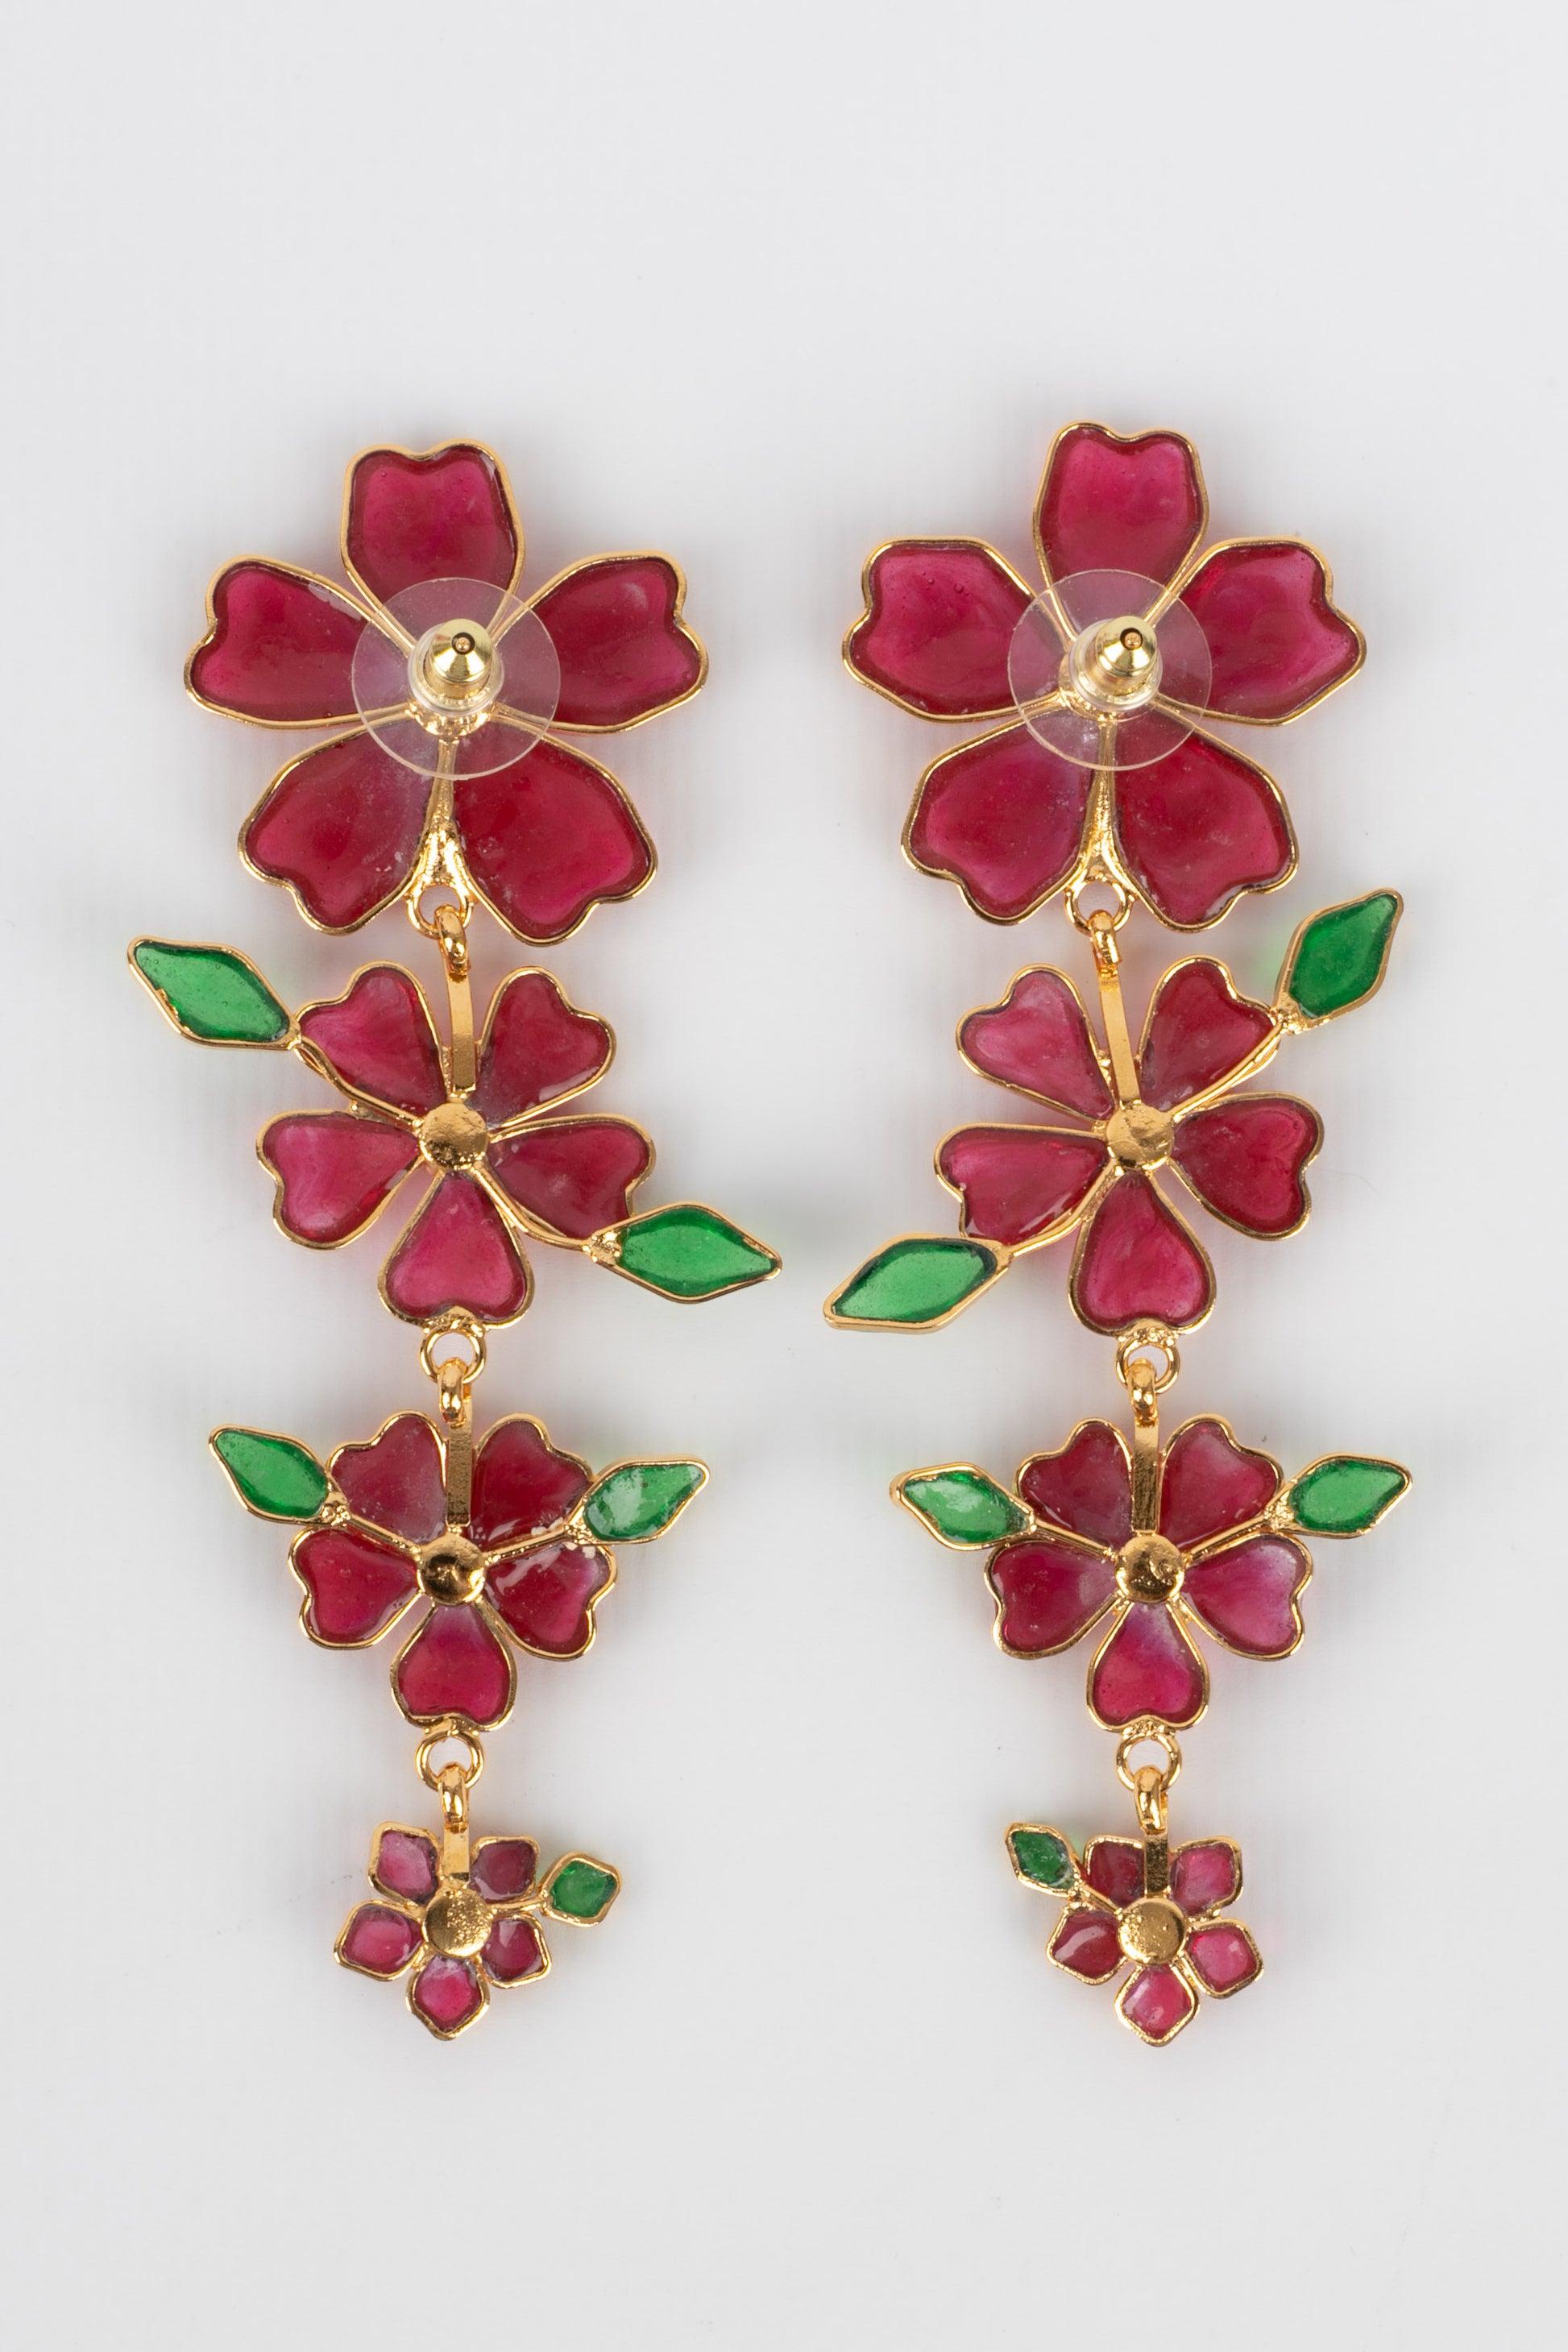 Augustine Golden Metal Earrings with Glass Paste in Red and Dark Red Tones For Sale 2